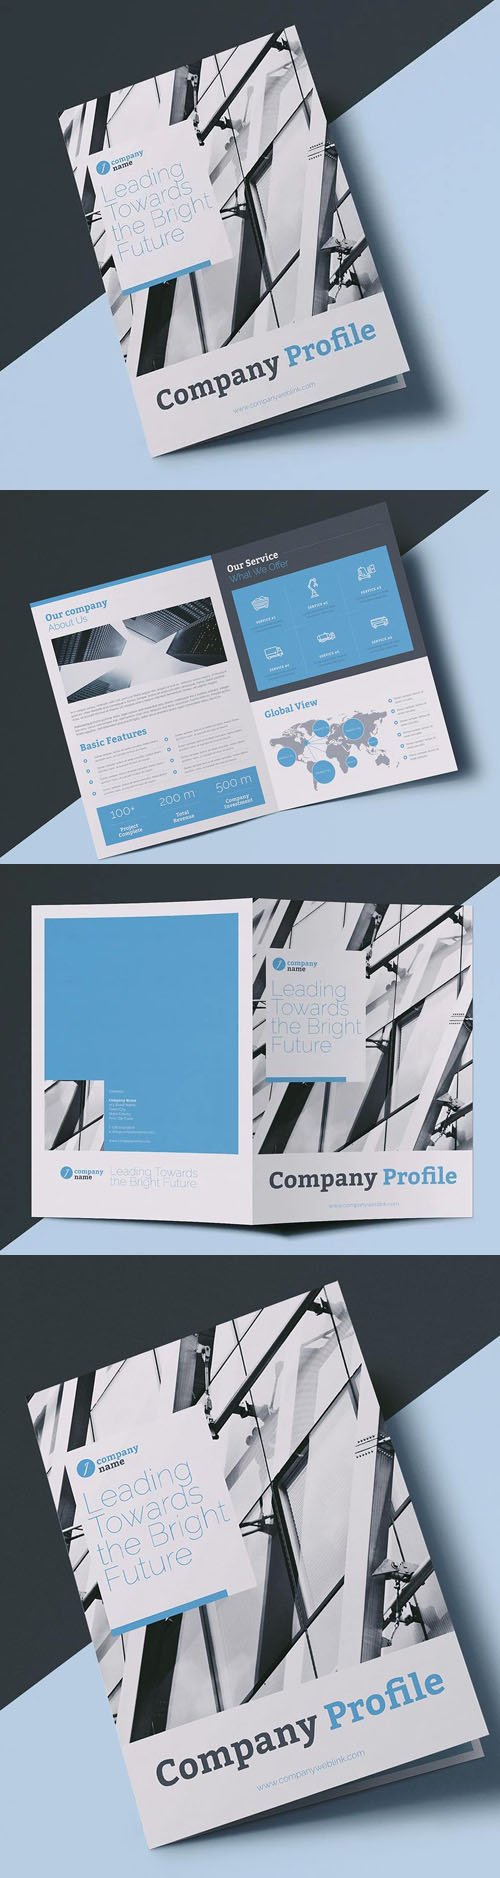 Company Profile InDesign INDD/IDML Brochure Template [4-Pages]